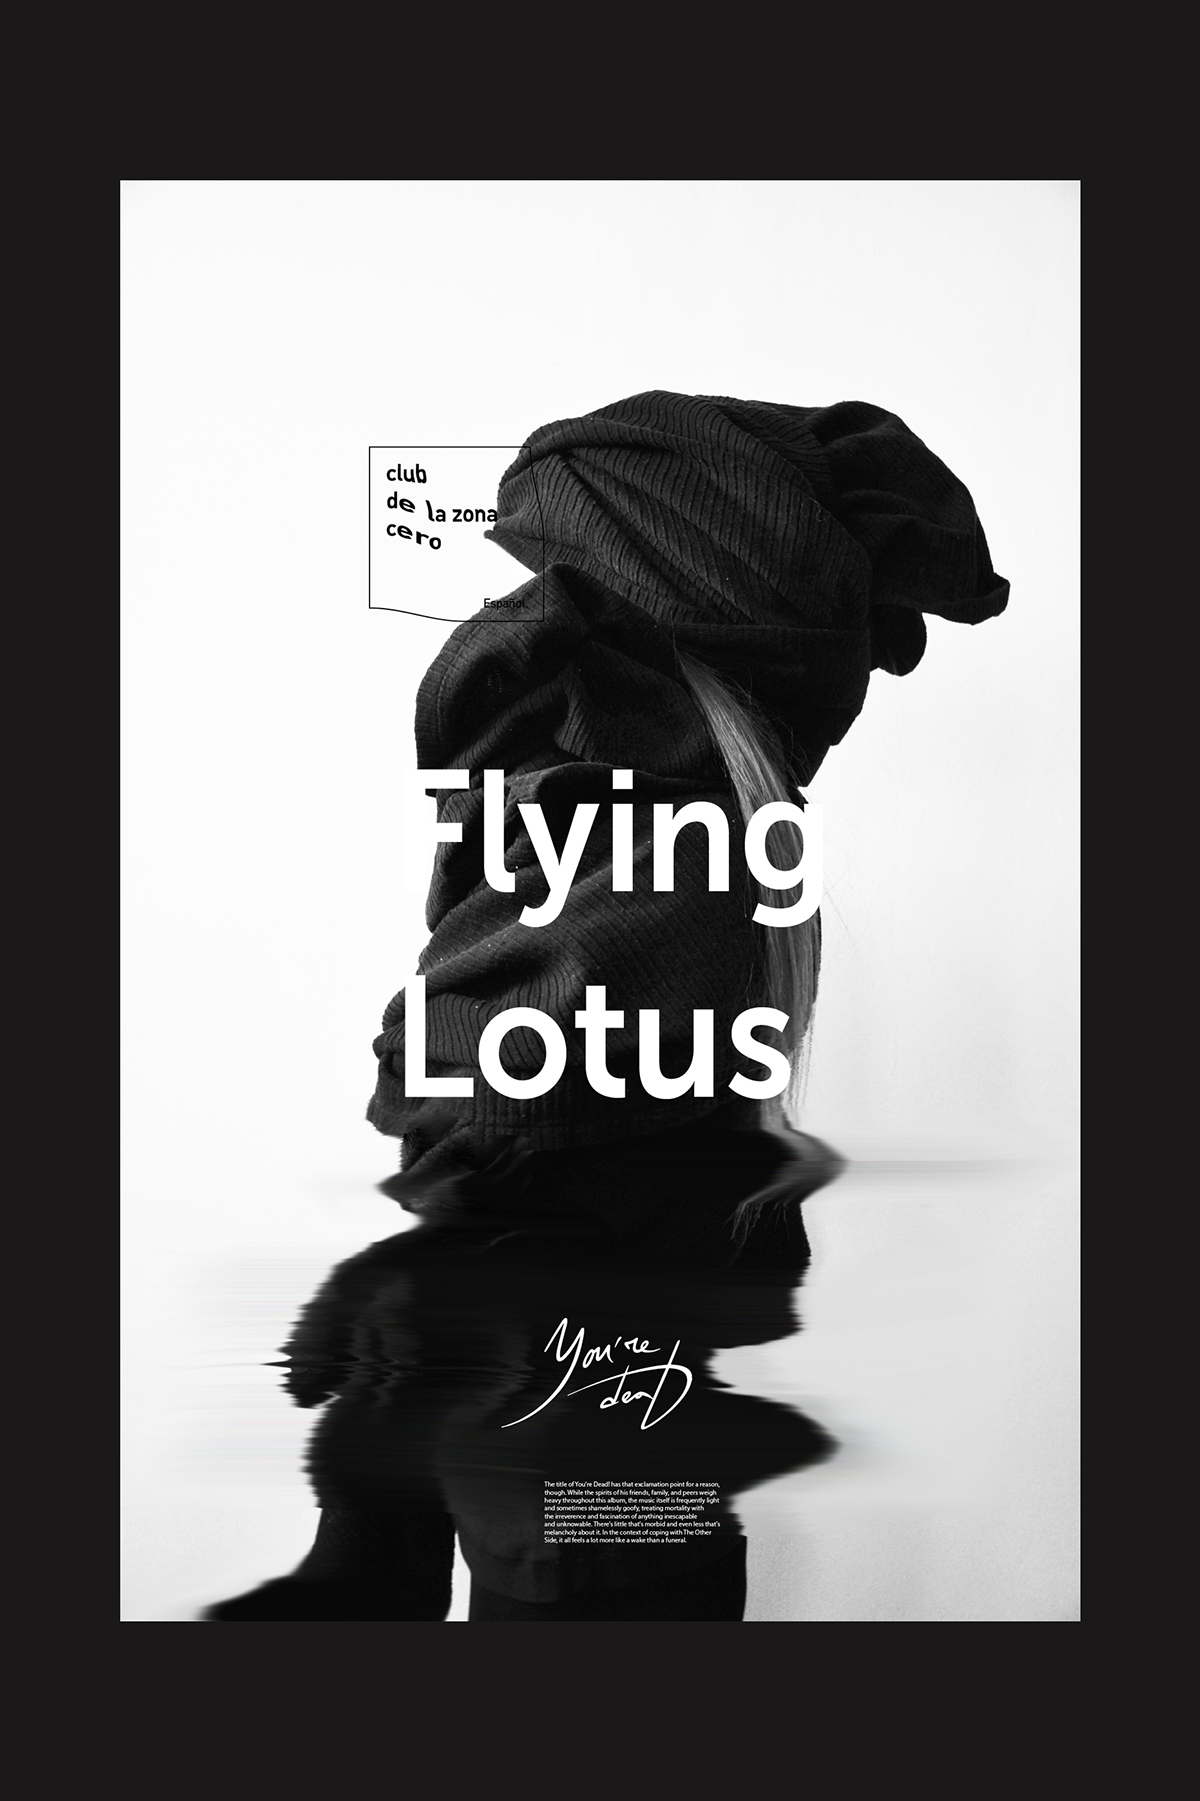 Flying lotus Lotus Flying poster black White Minimalism photo Style dead lettering graphic logo installation hands